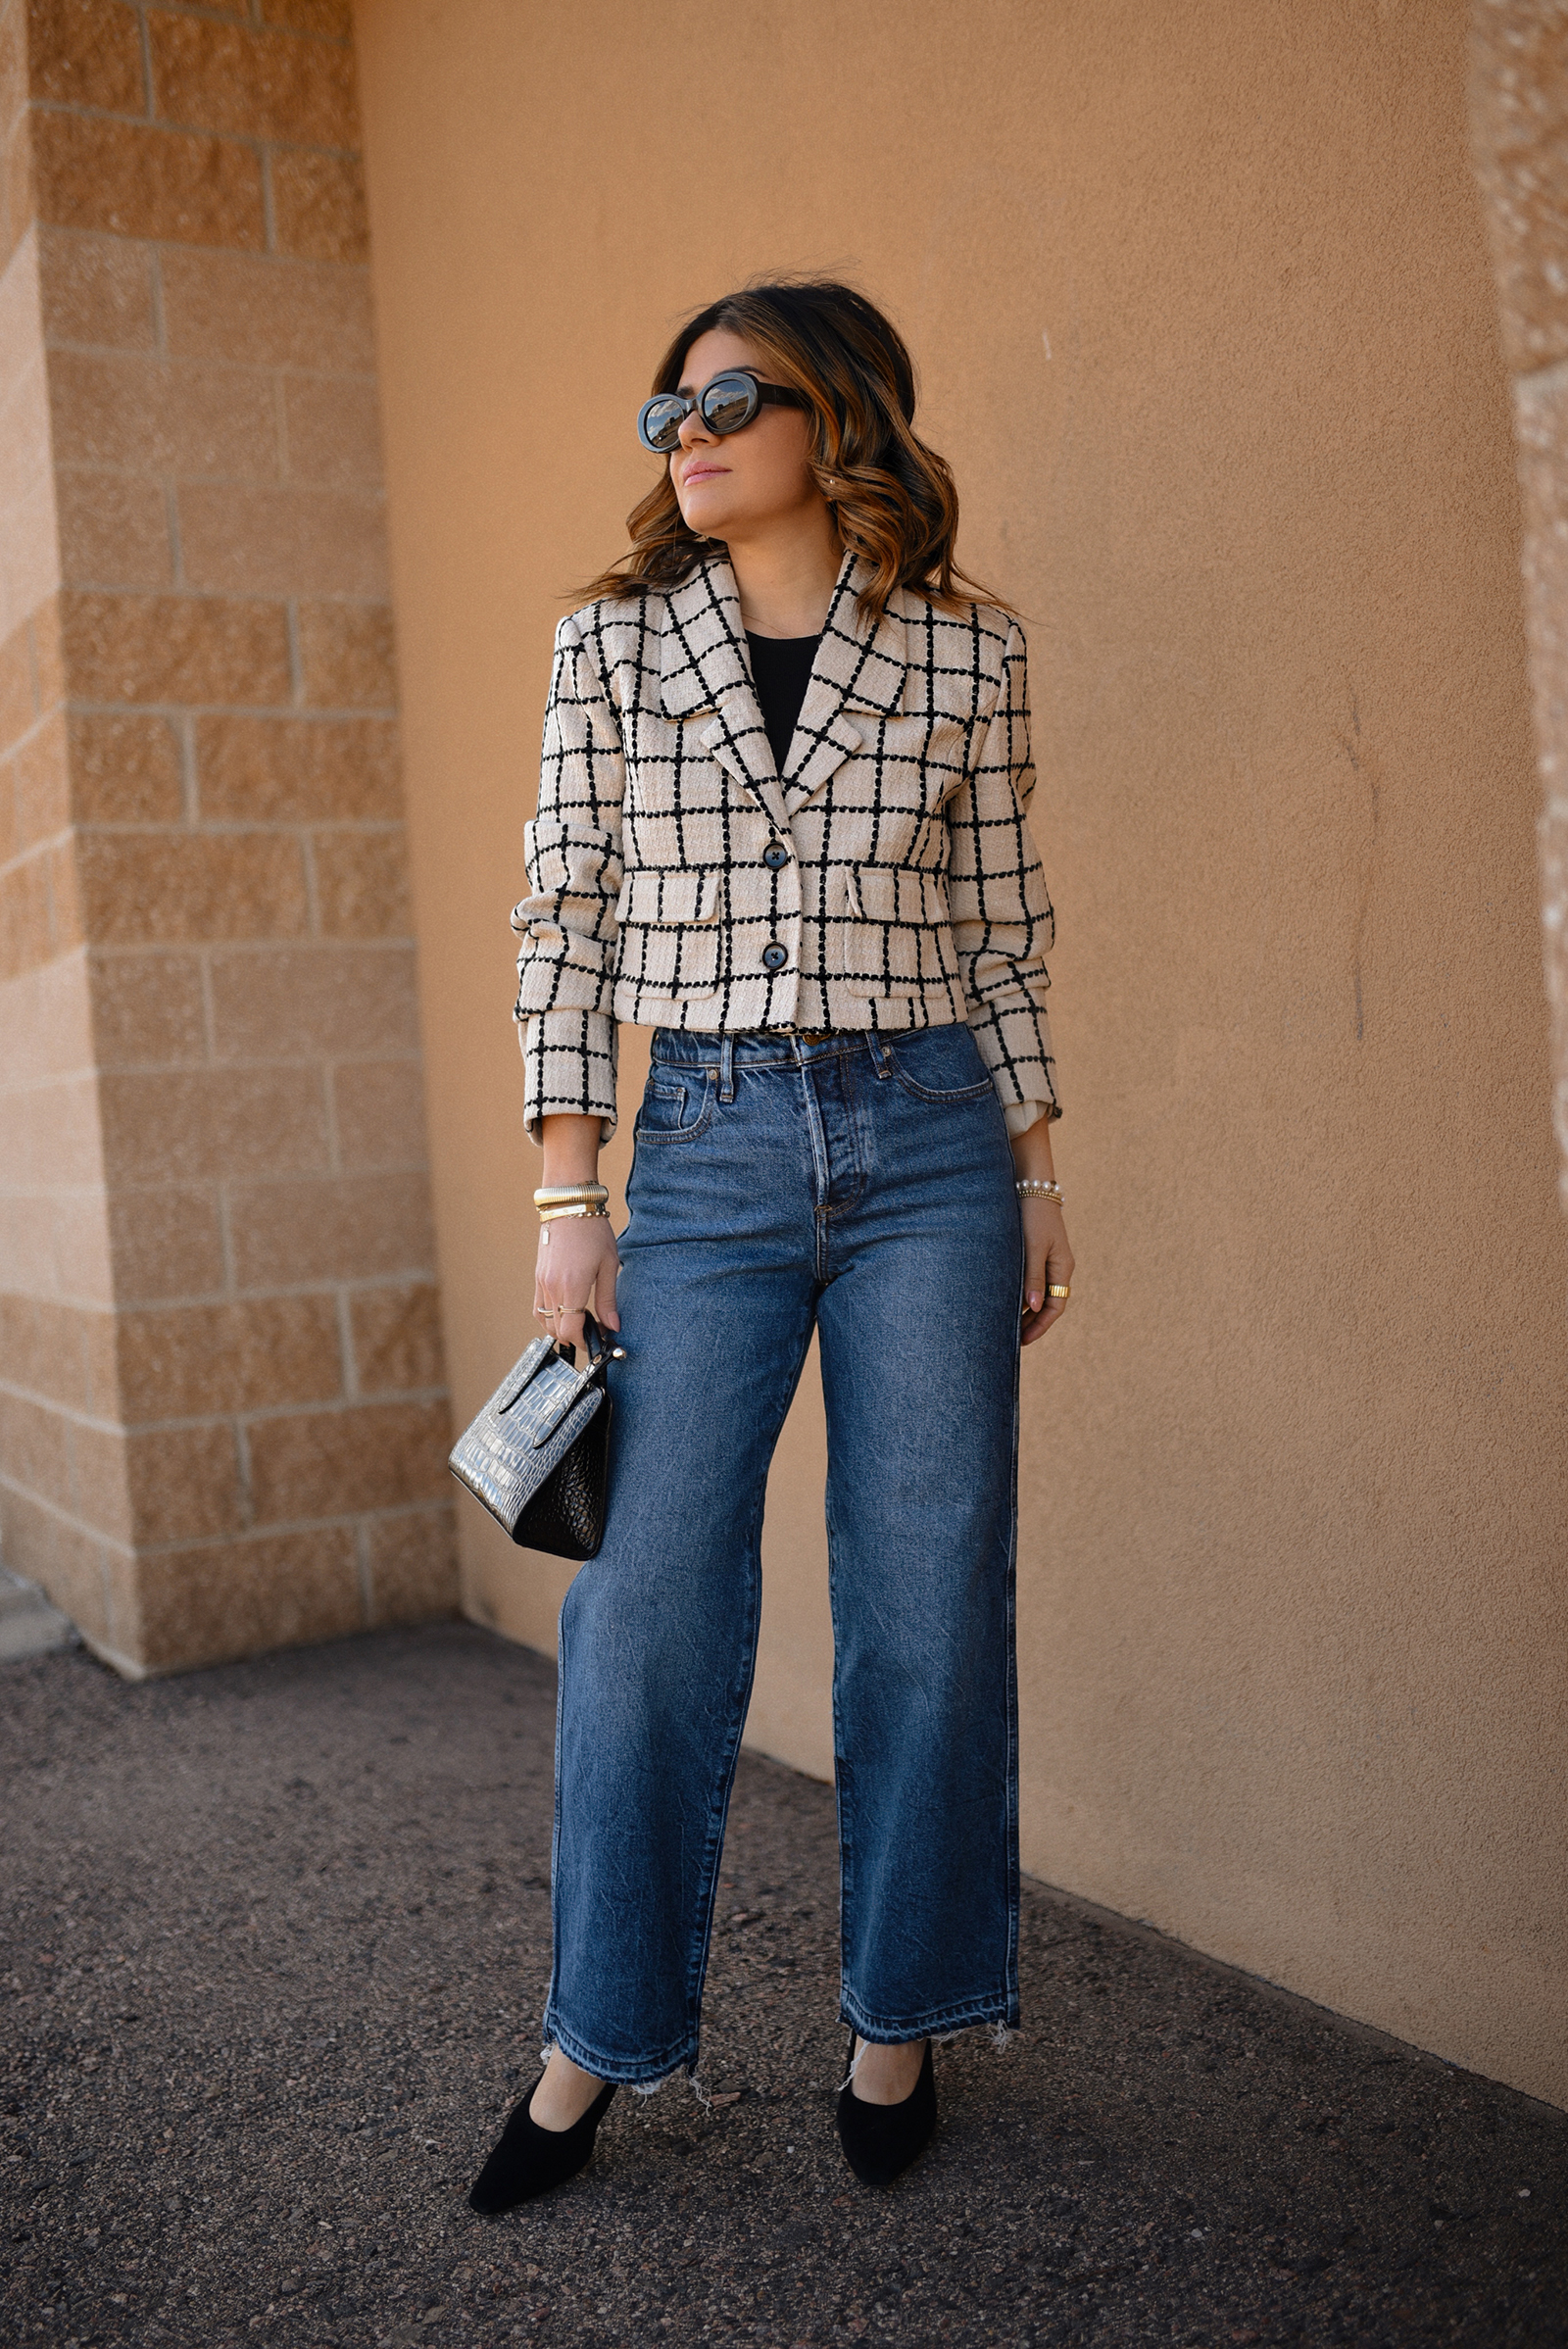 Carolina Hellal of Chic Talk wearing a plaid cropped blazer via Shopbop, Express jeans, Strathberry Leather Tote and Celine sunglasses